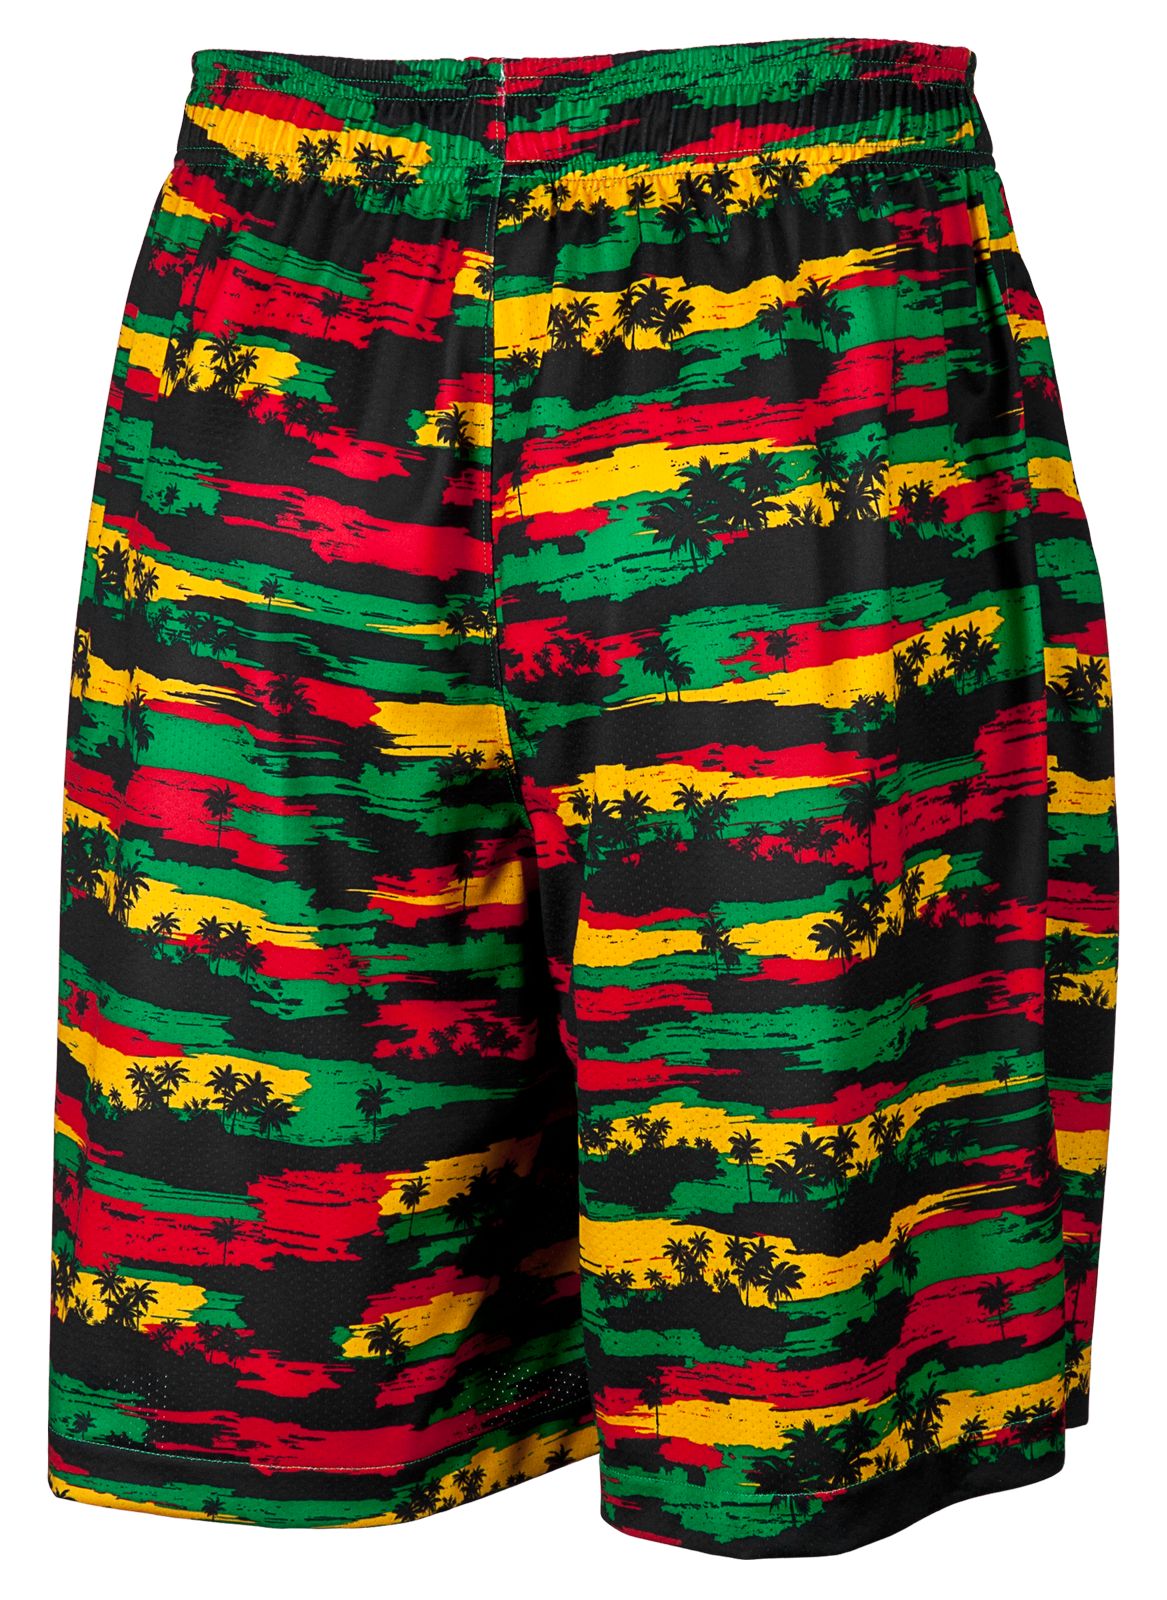 Hawaiian Short, Black with Red & Green image number 0